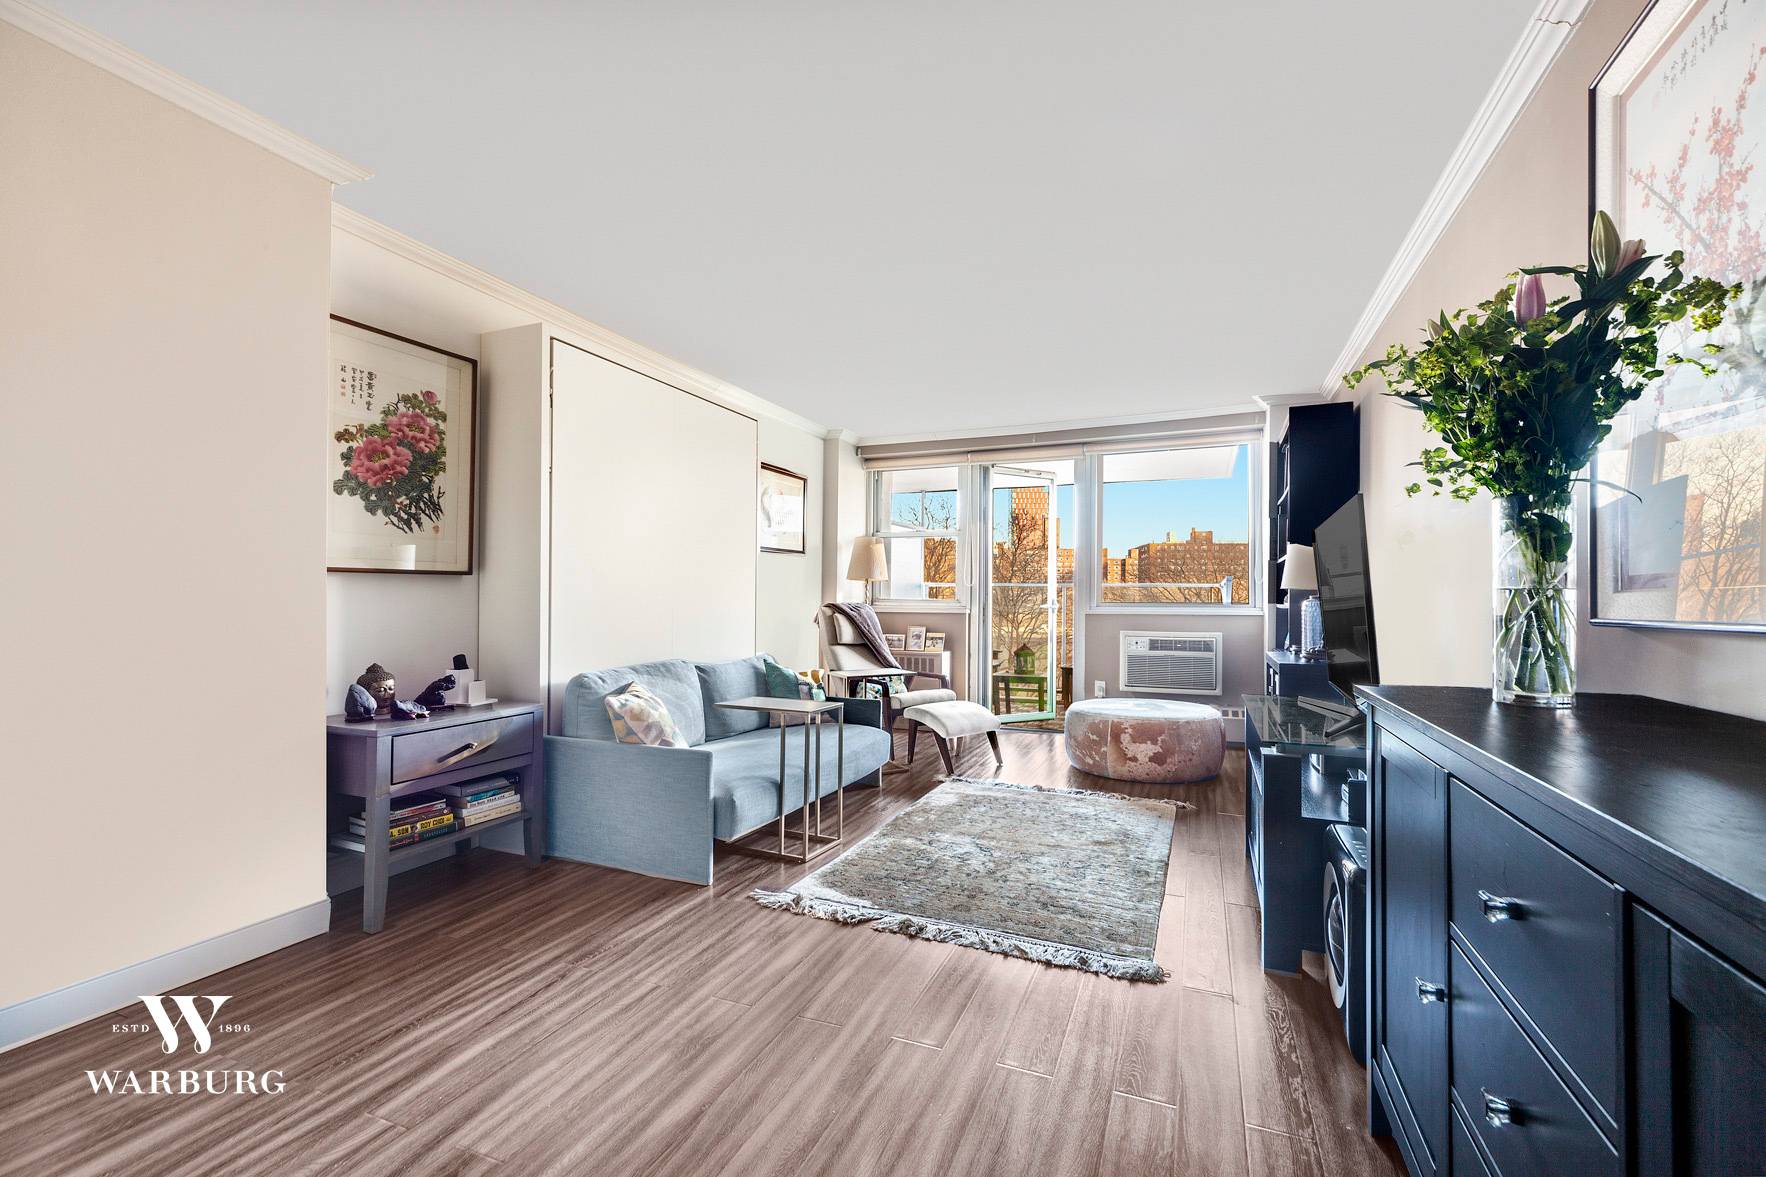 This completely renovated, open concept one bedroom coop, with private terrace and open views of Cadman Plaza, in a Brooklyn Heights modern, full service high rise, is now available.